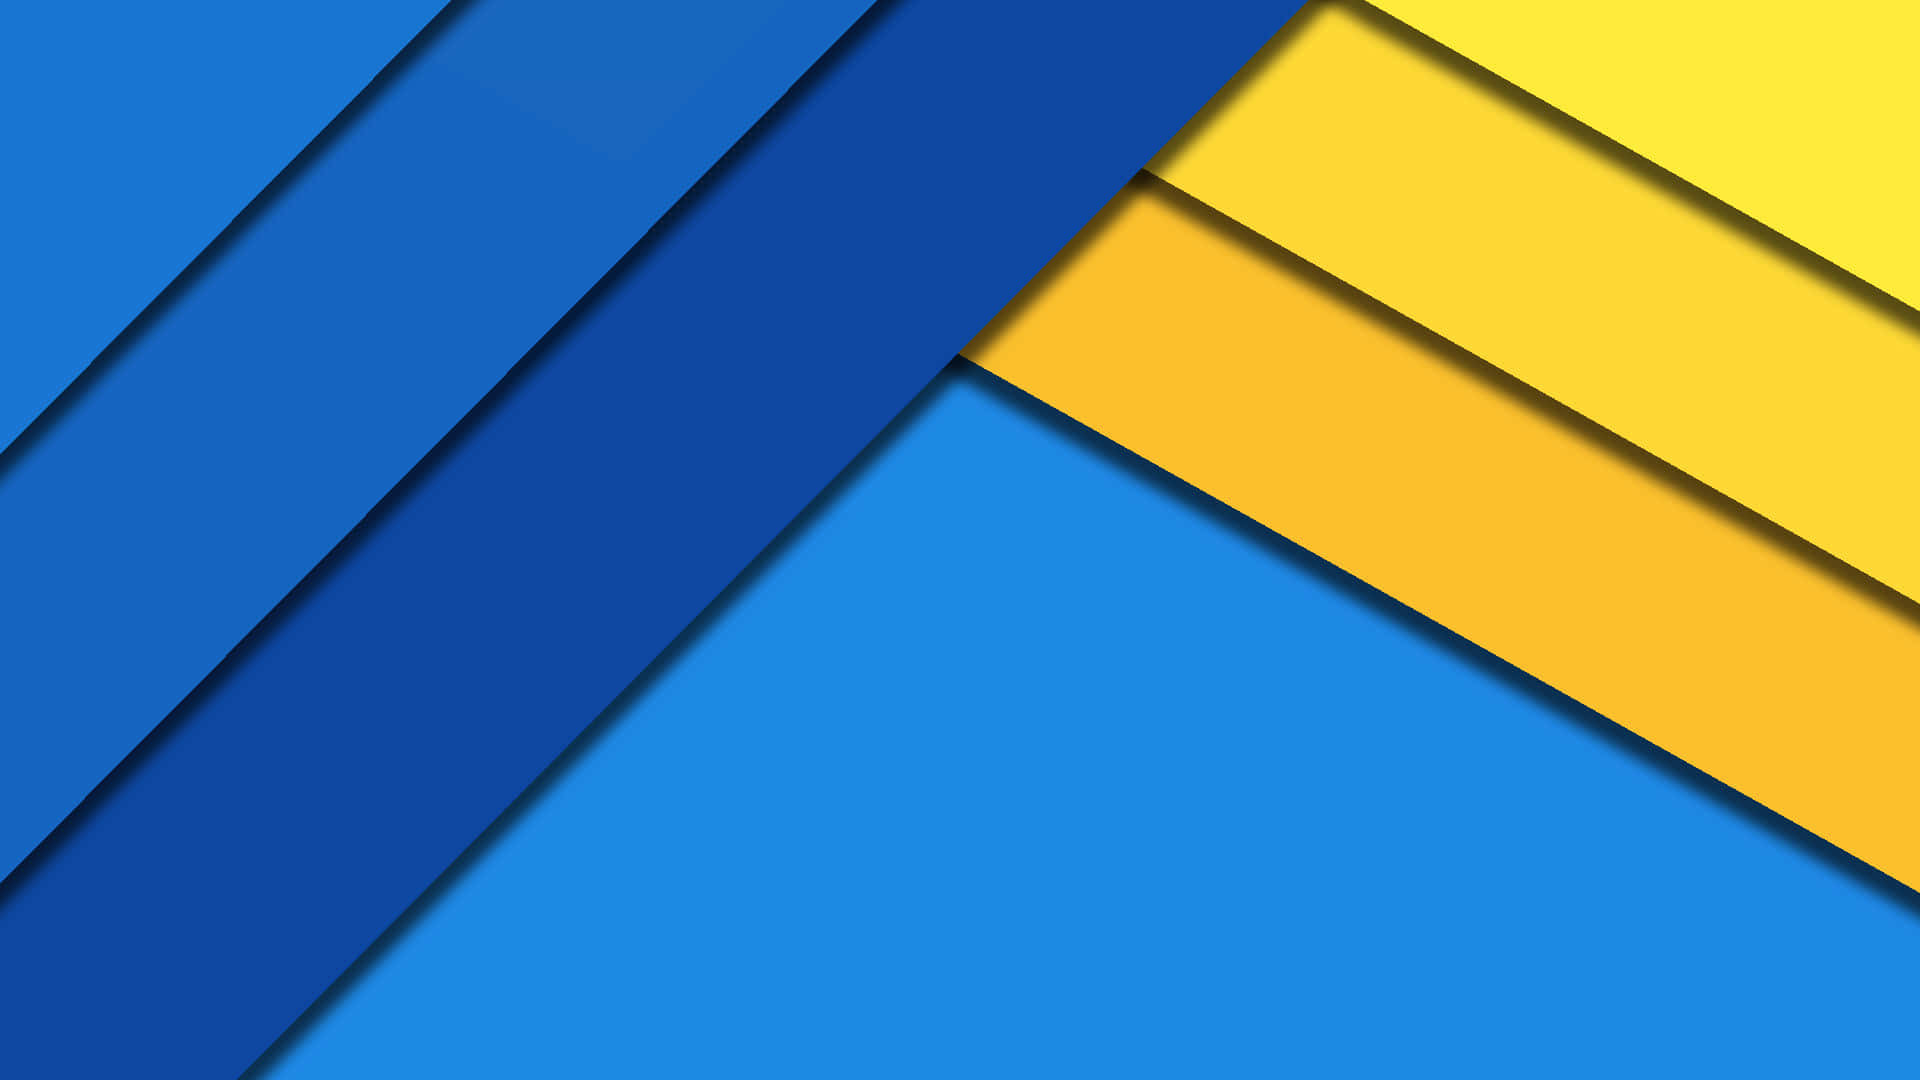 Blue And Yellow Background Diagonal Intersecting Lines